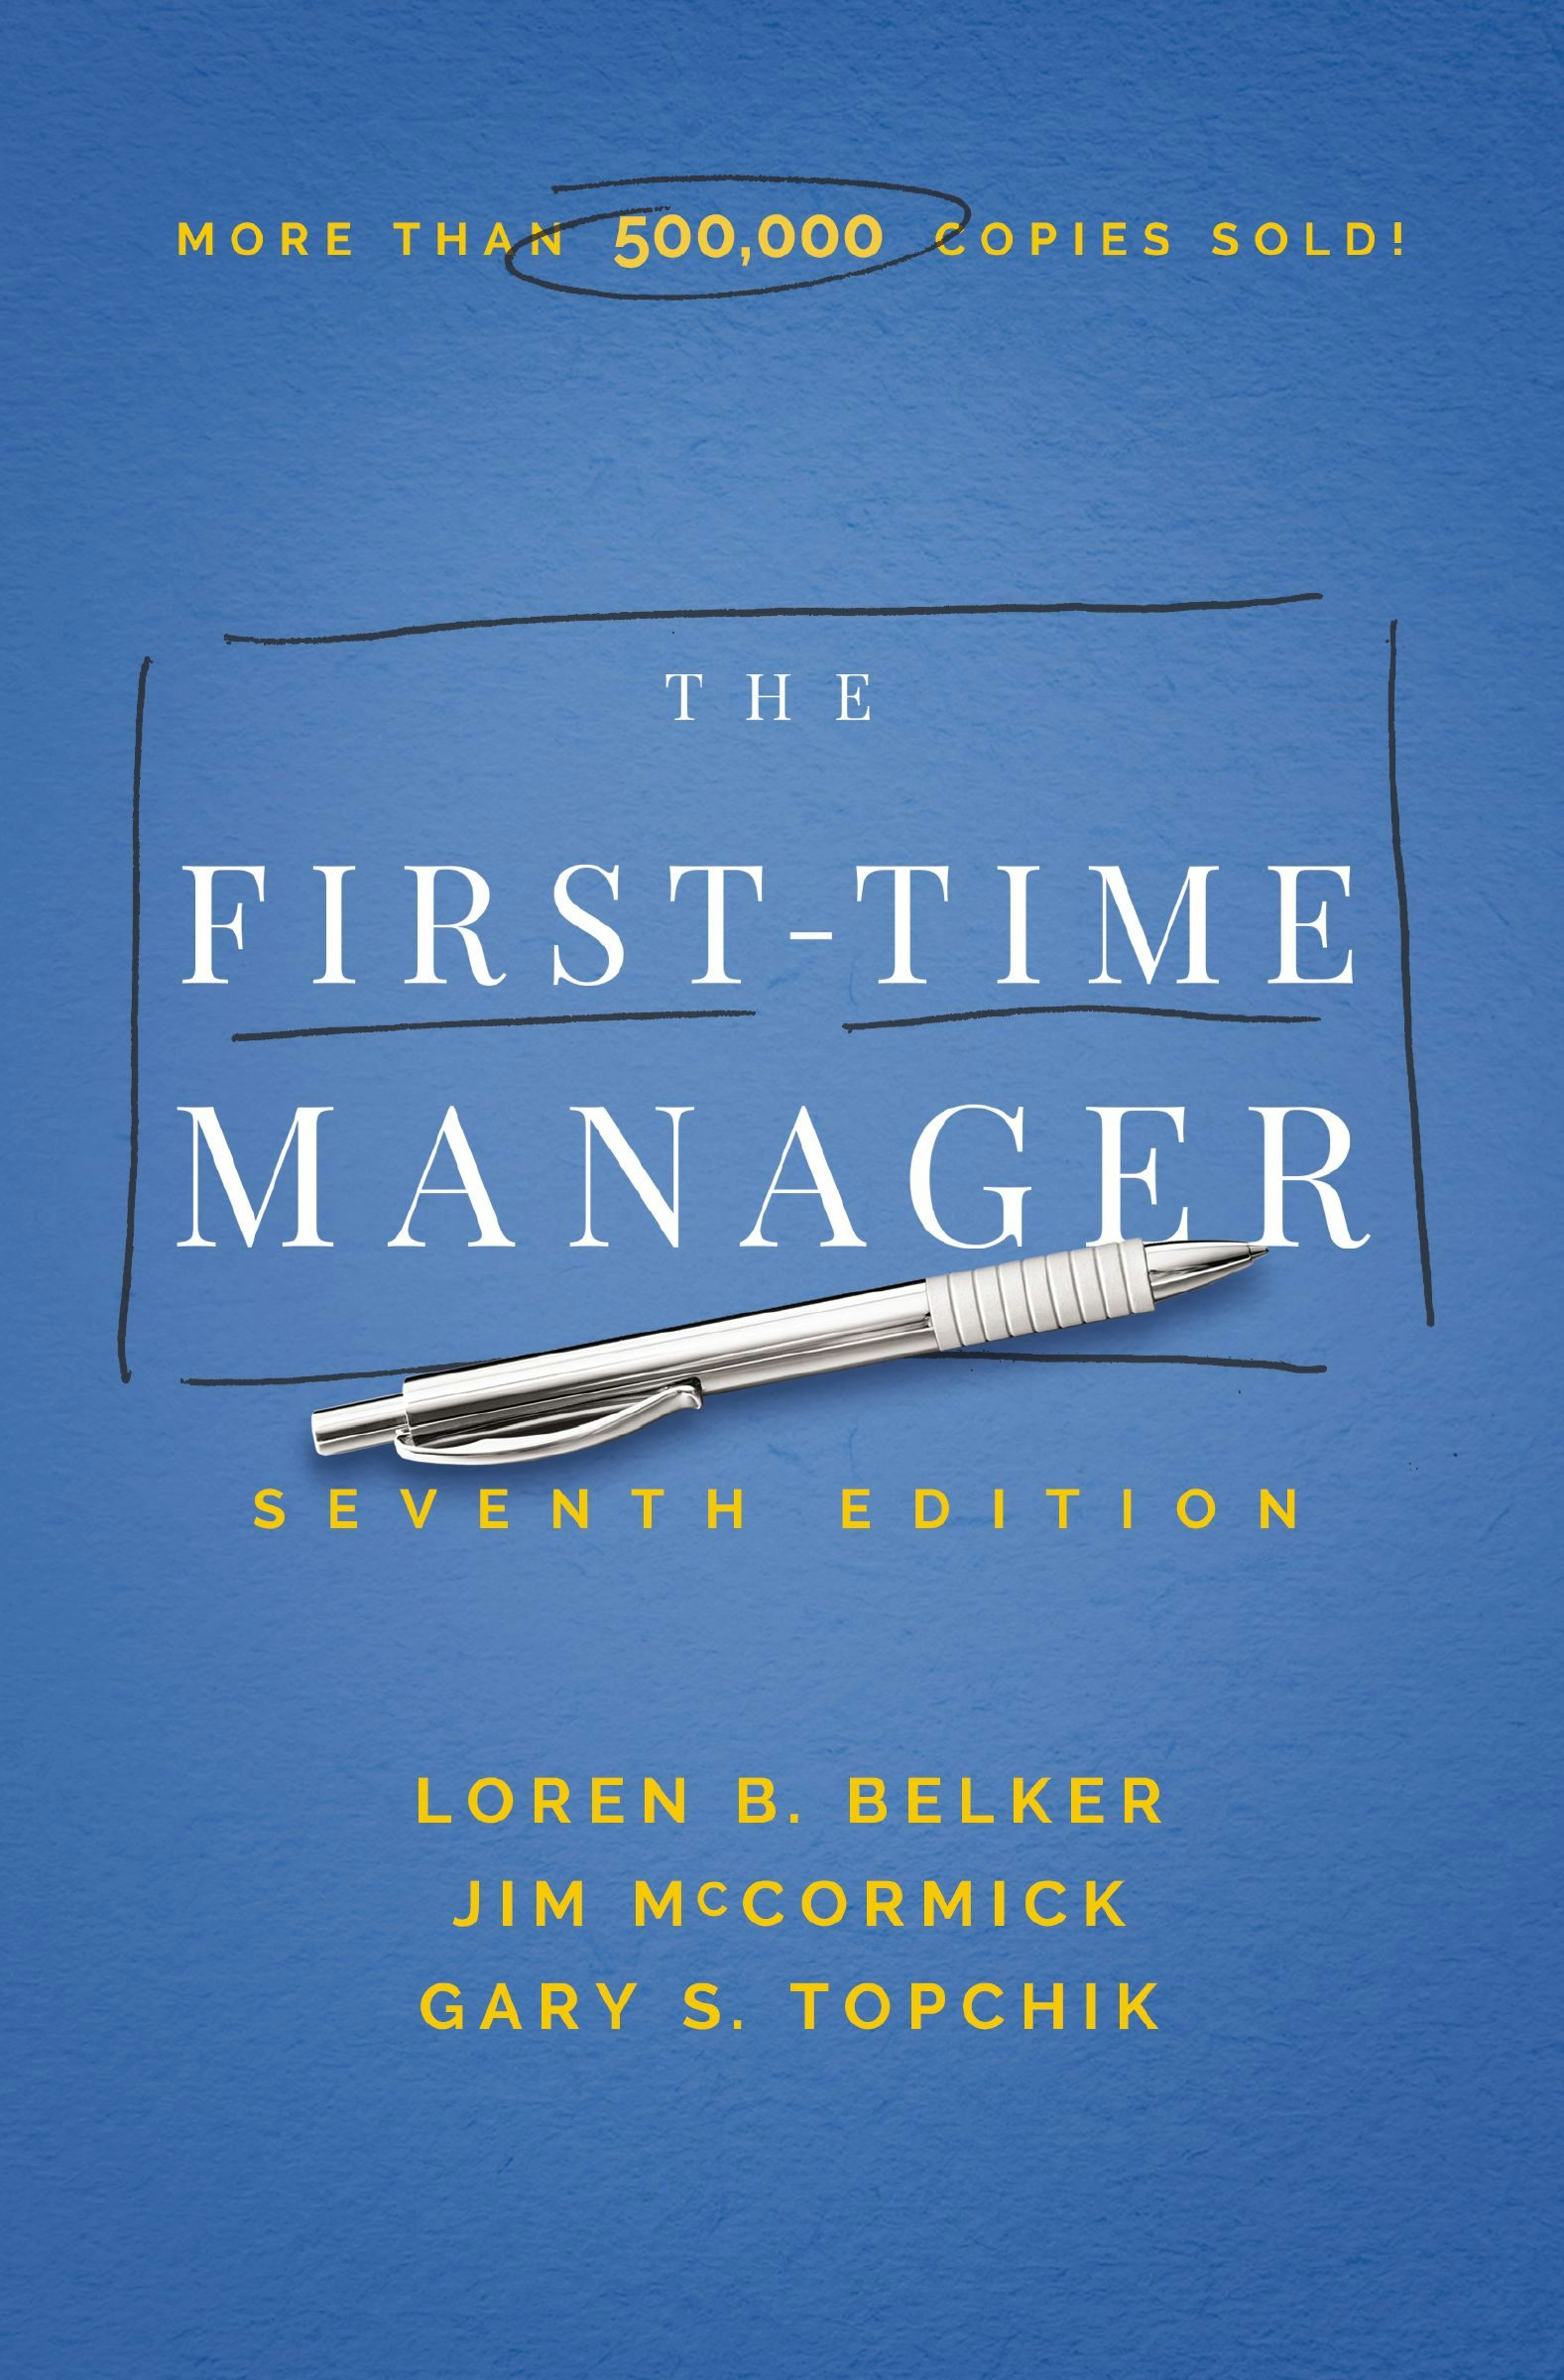 first time manager